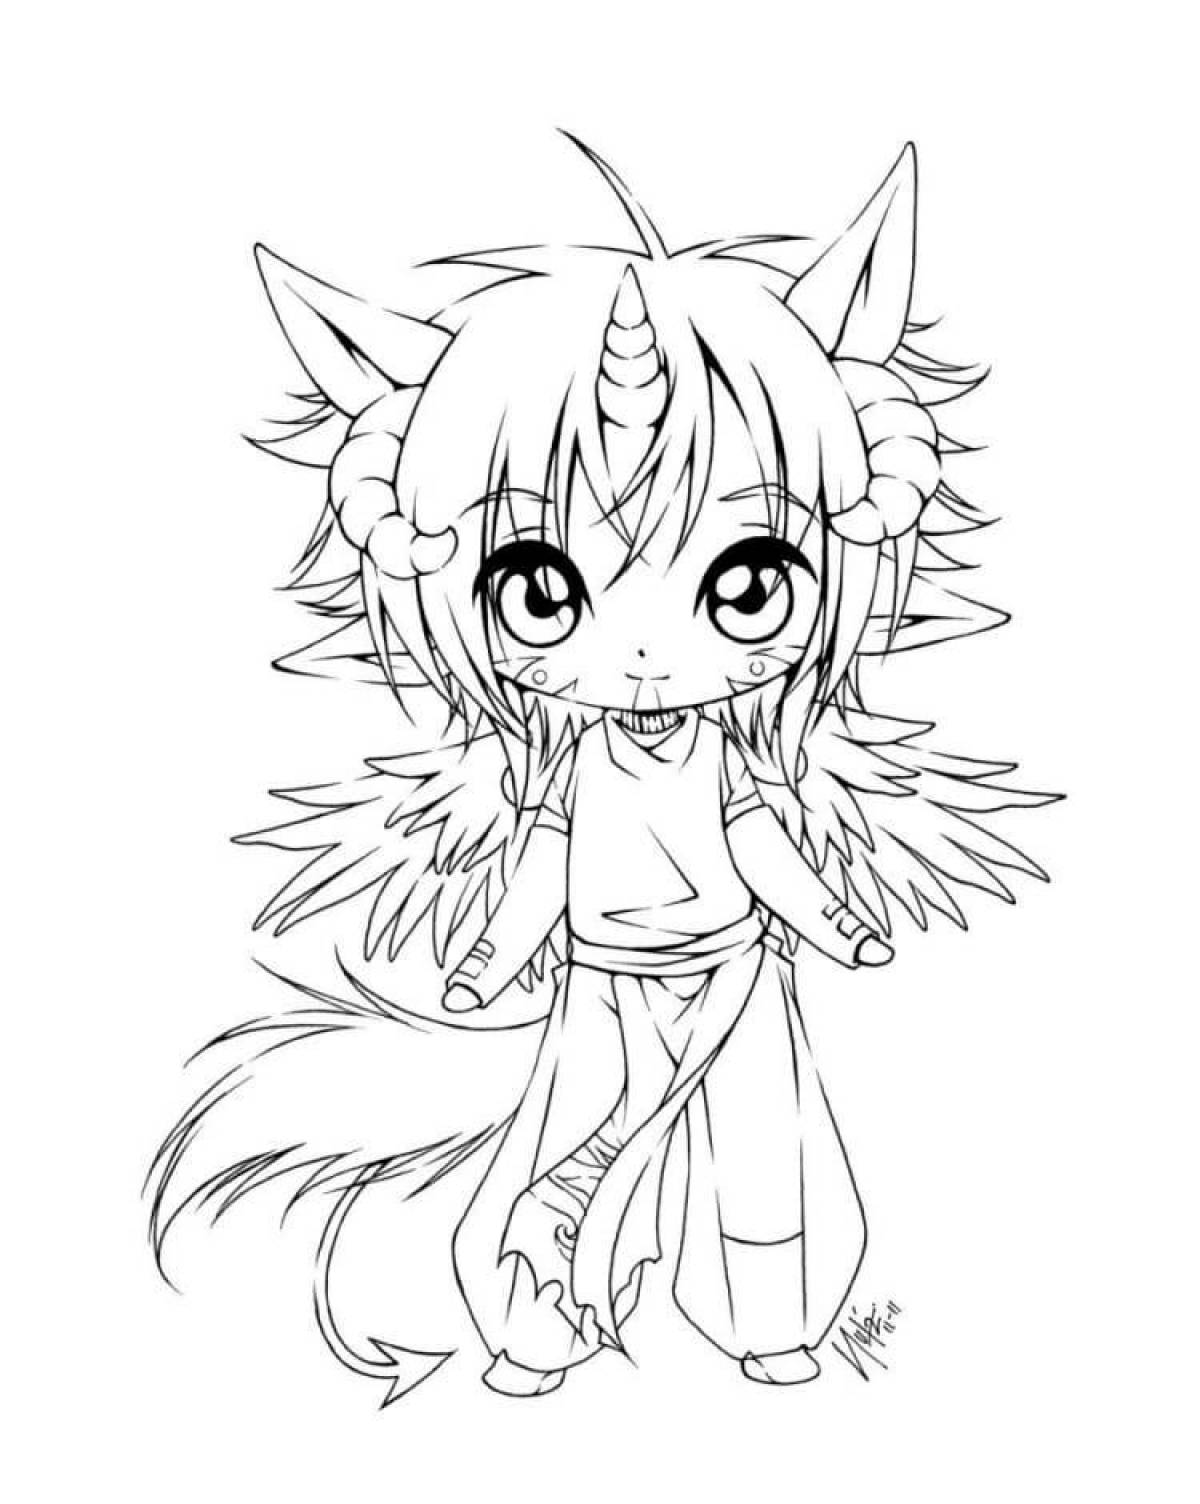 Adorable chibi coloring page